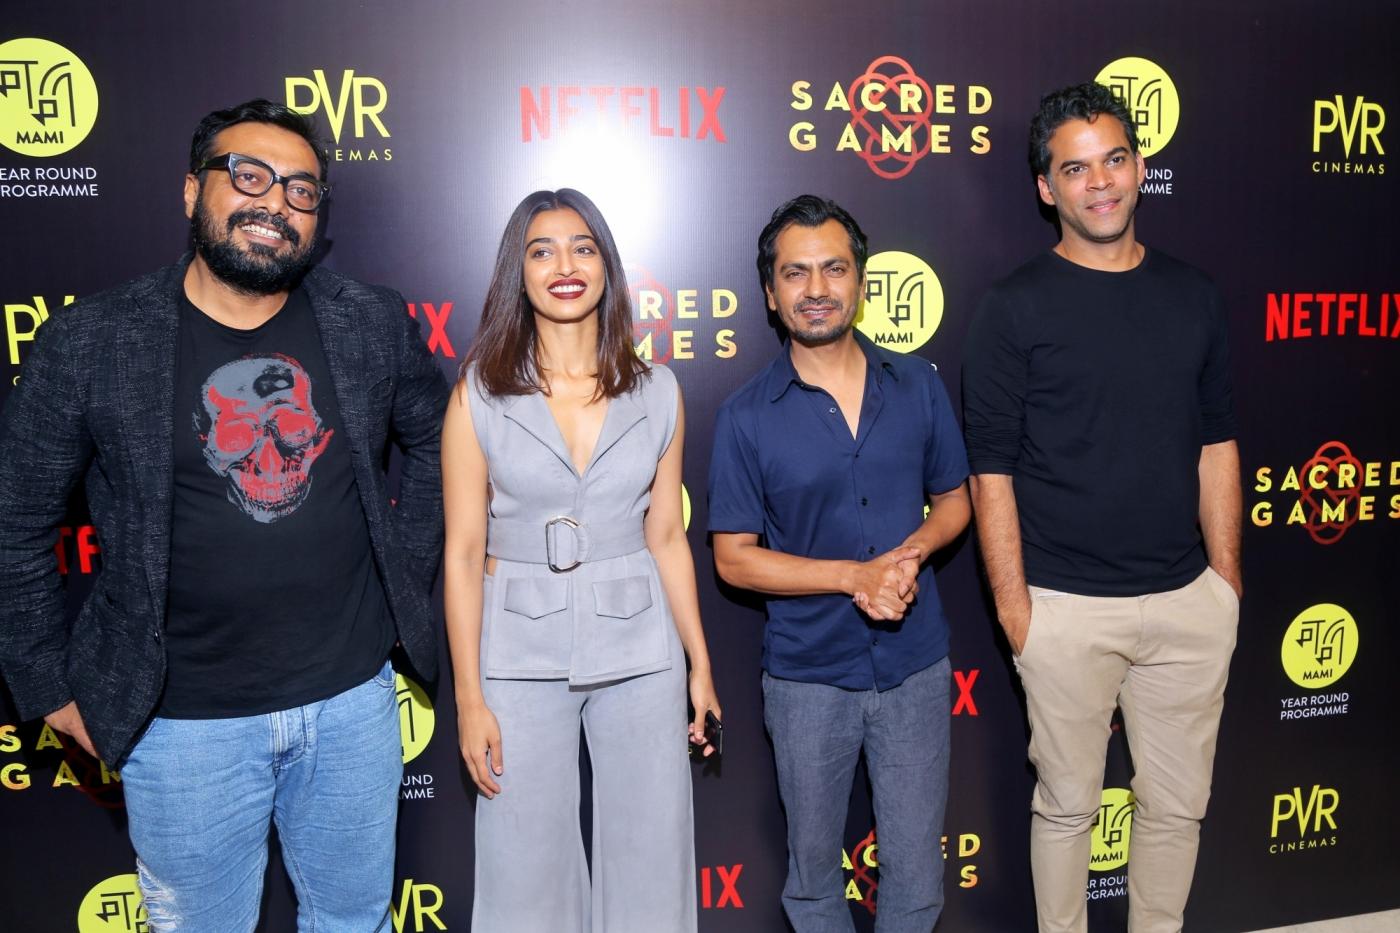 New Delhi: Director Anurag Kashyap with actors Radhika Apte and Nawazuddin Siddiqui at the special screening of film "Sacred Games" in New Delhi on July 3, 2018. (Photo: IANS) by .